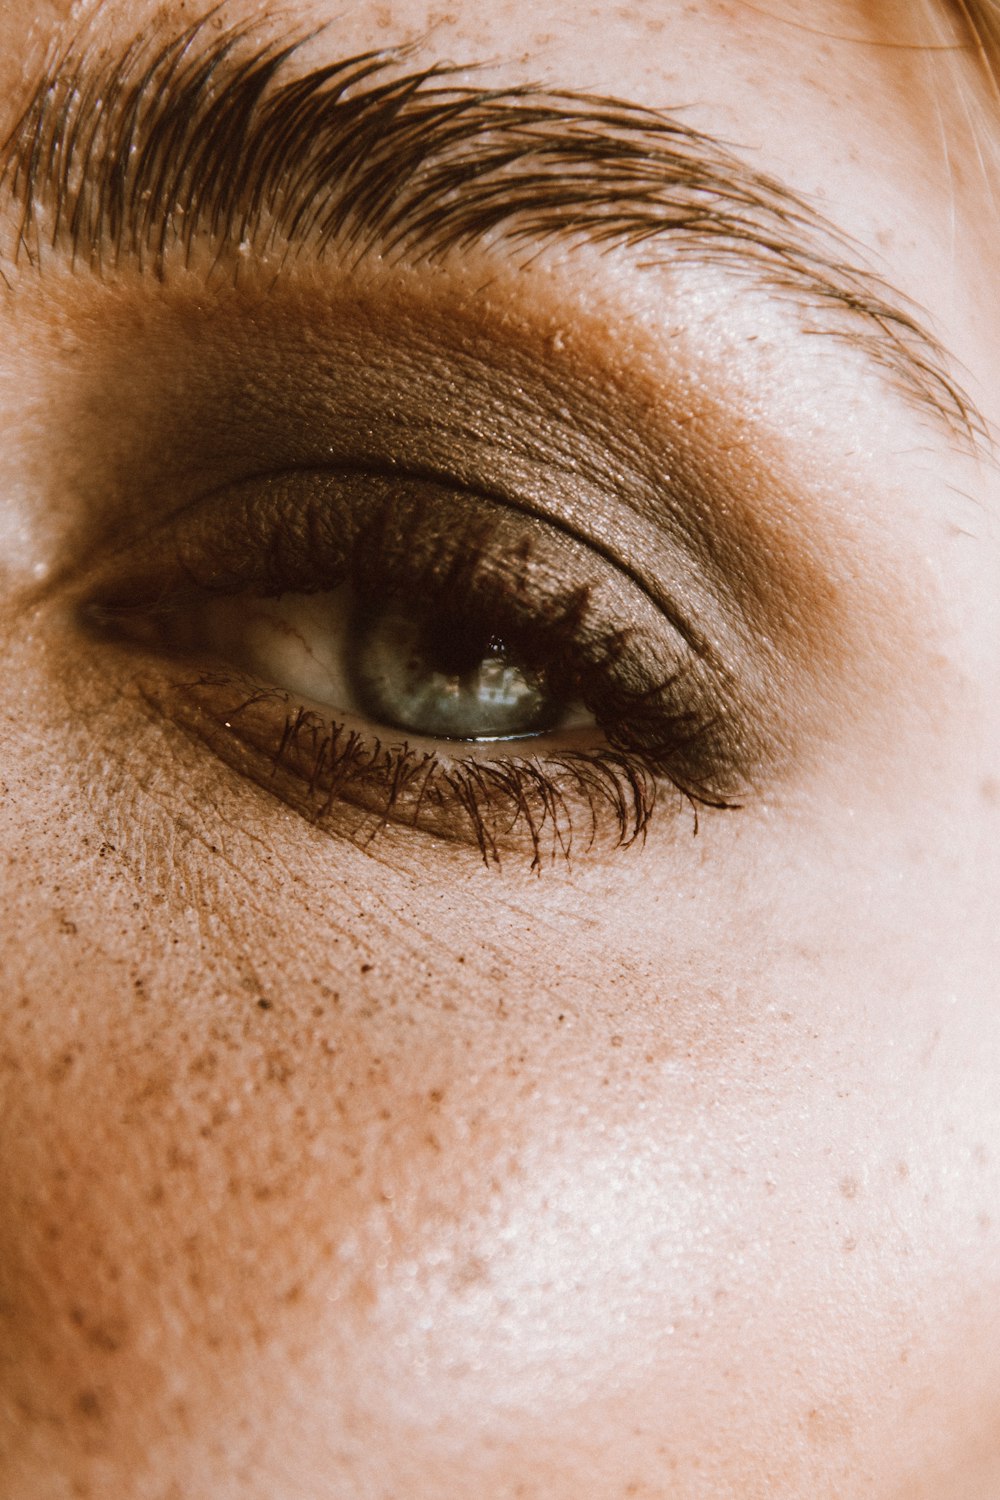 a close up of a woman's eye with frecks